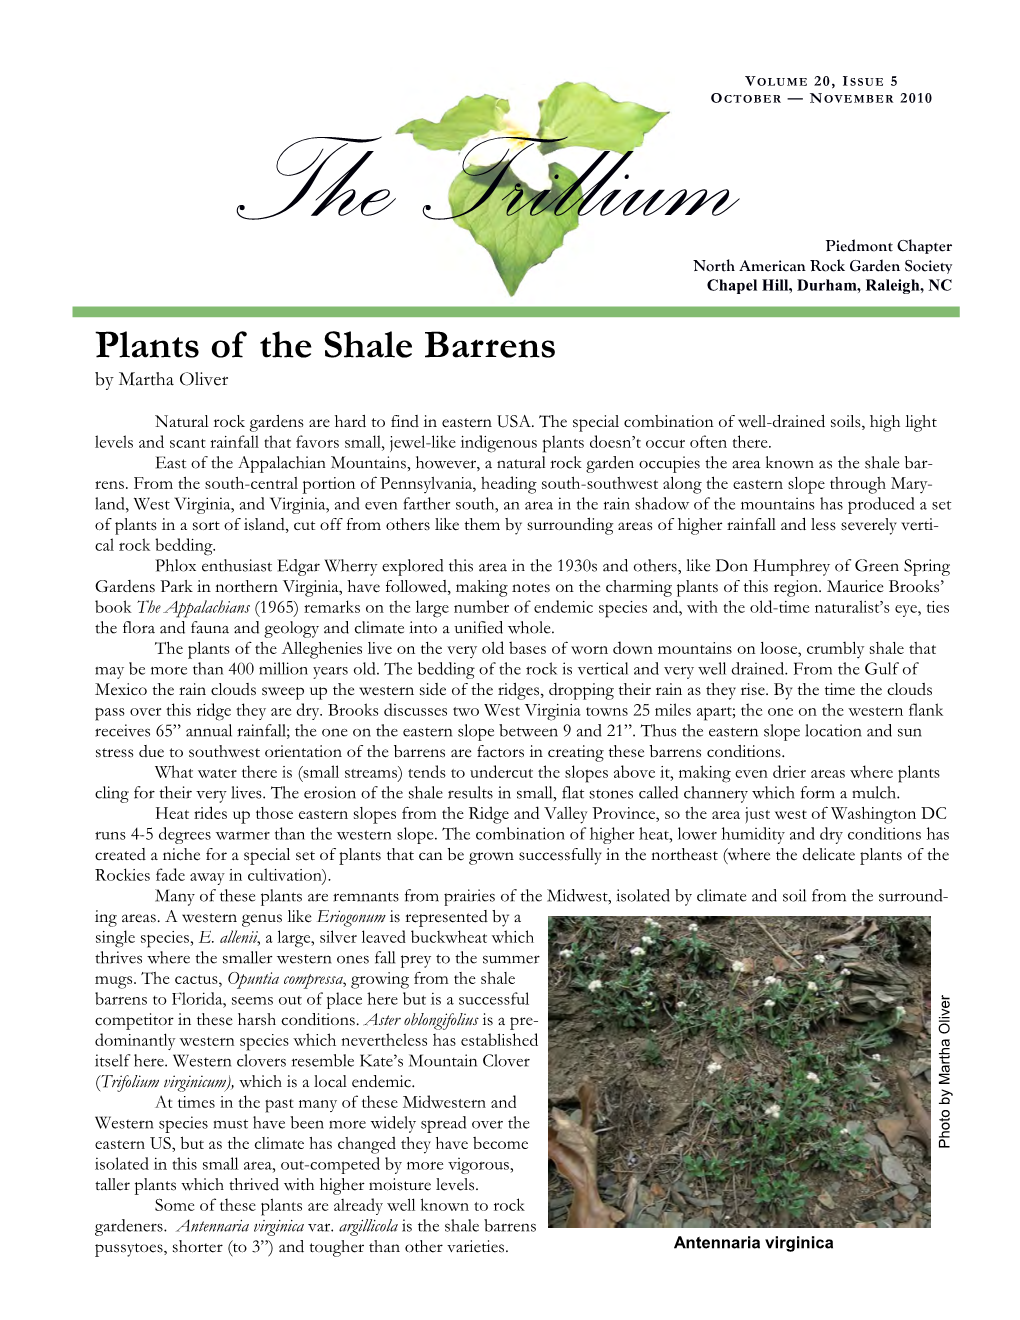 Plants of the Shale Barrens by Martha Oliver